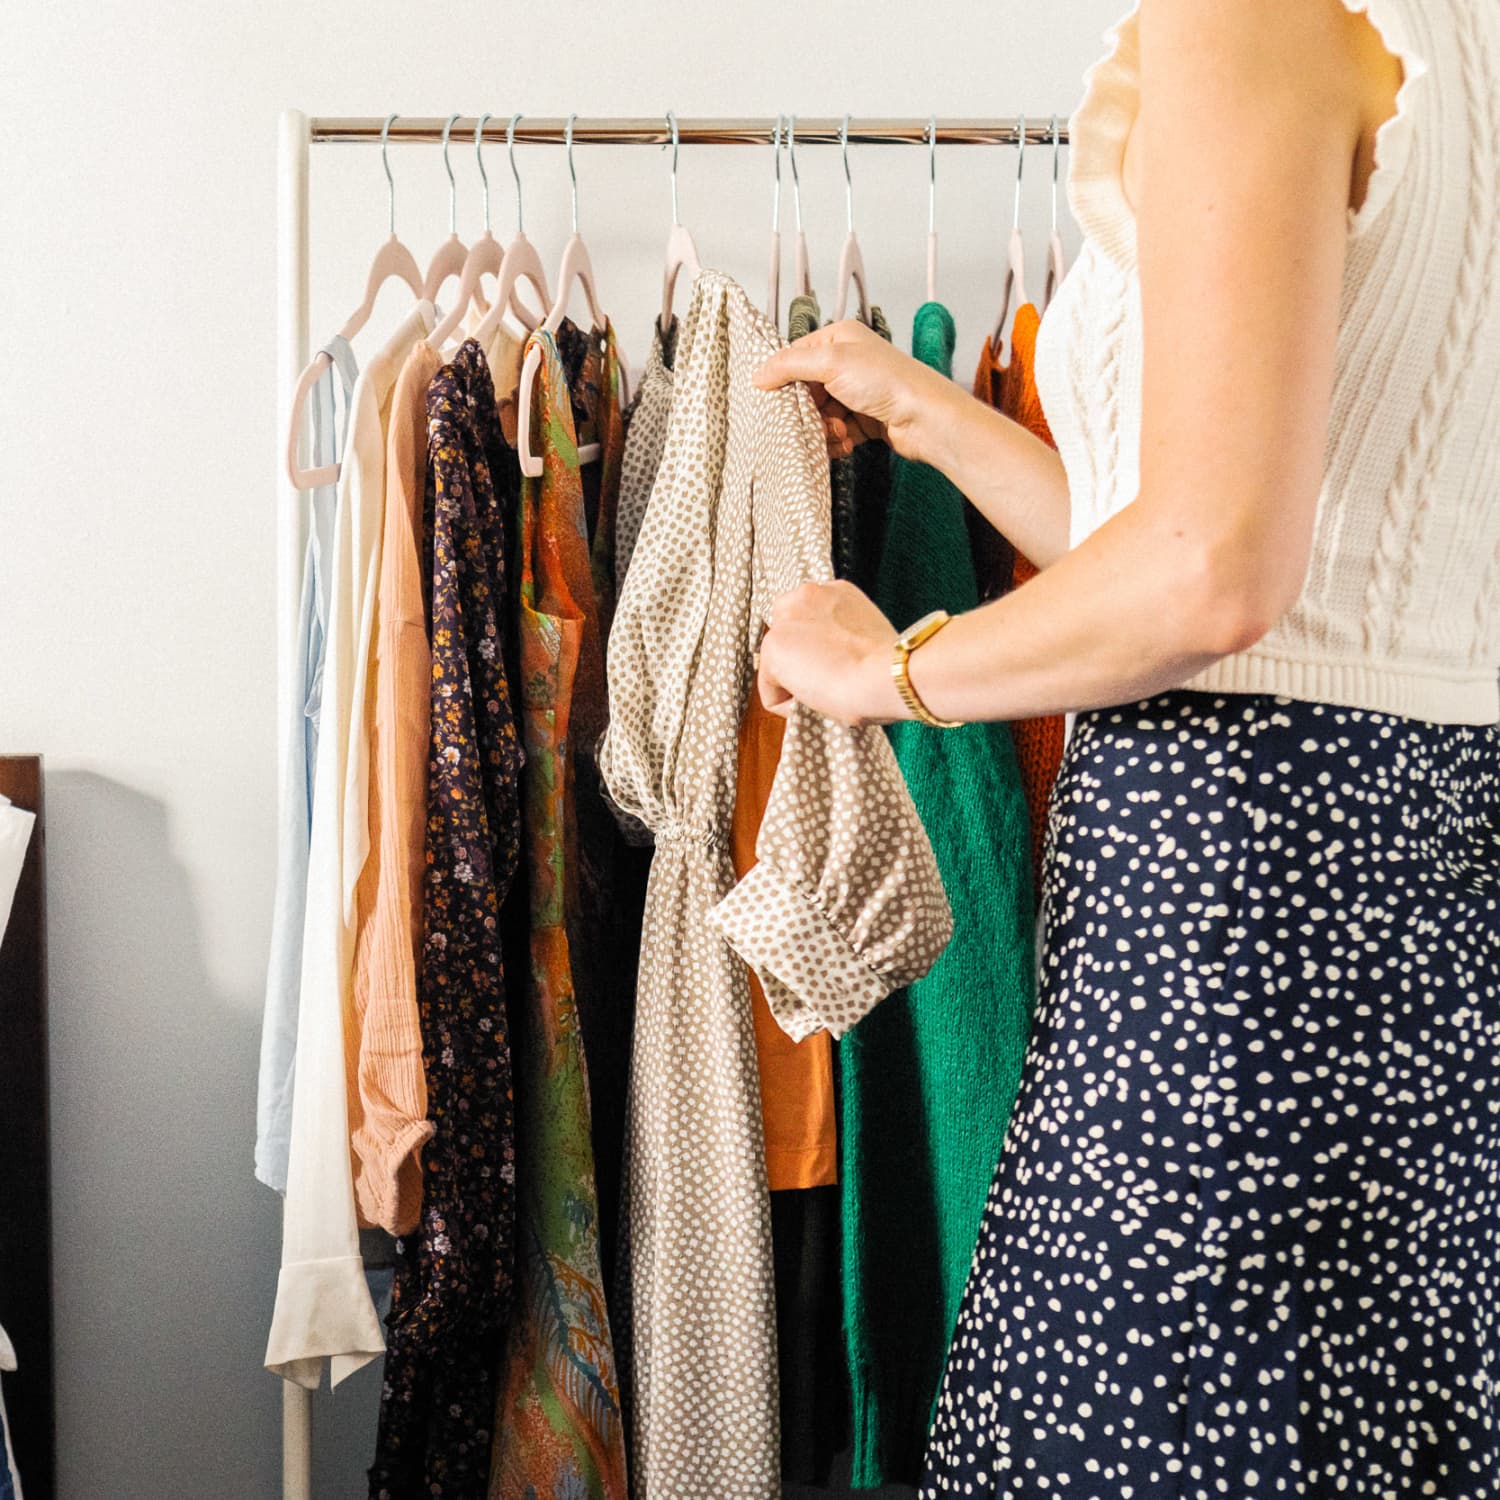 10 Corner Clothes Racks That Will Expand Your Storage Space